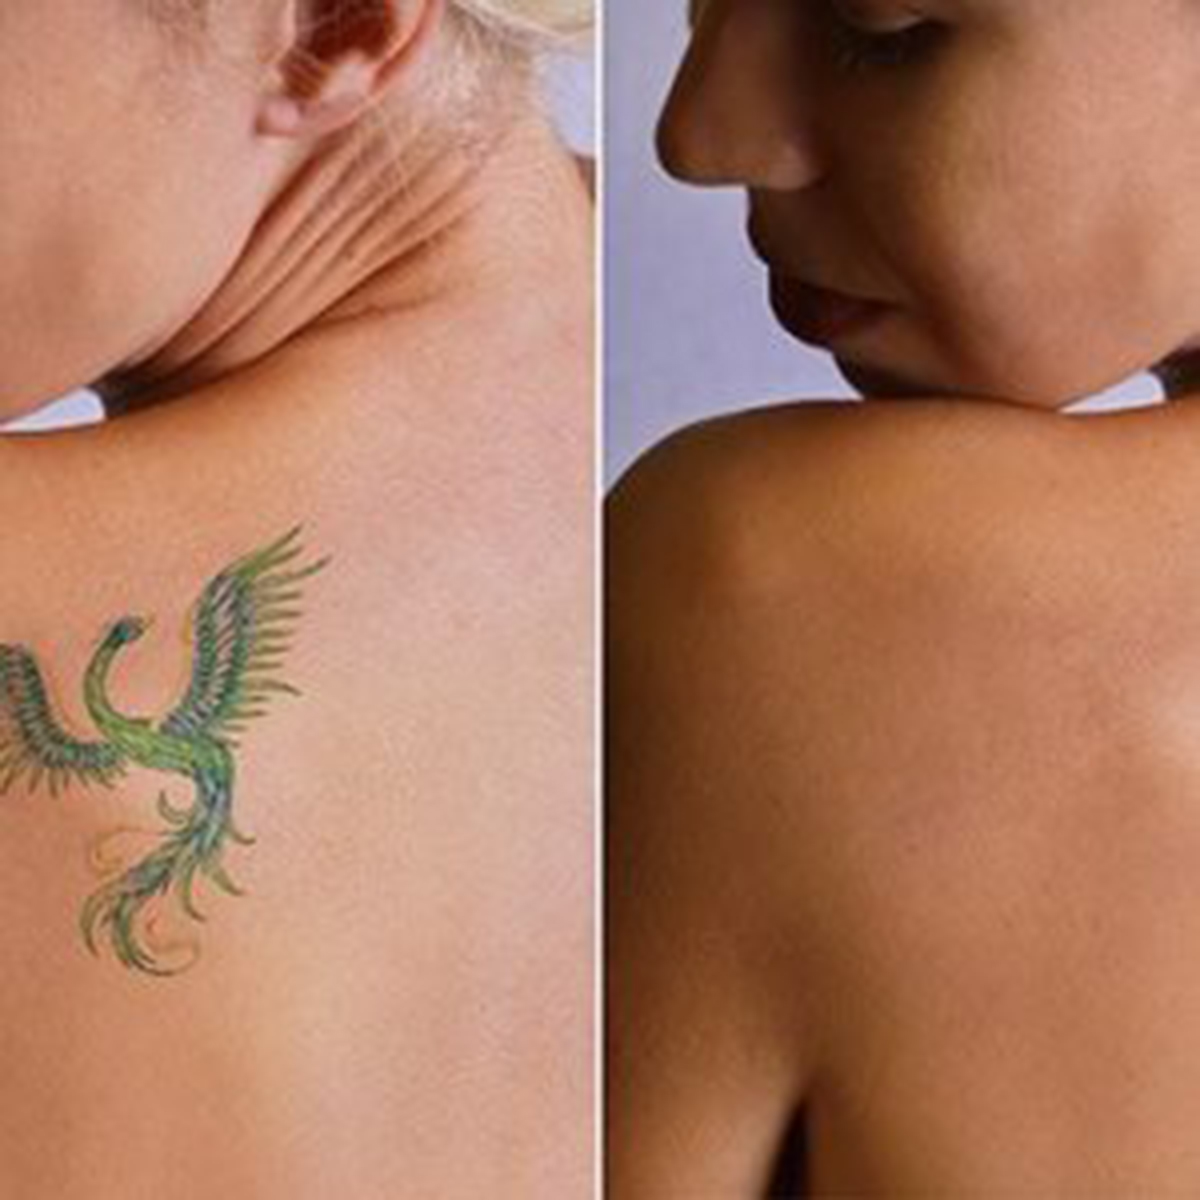 Dermatologist describes how to remove tattoos